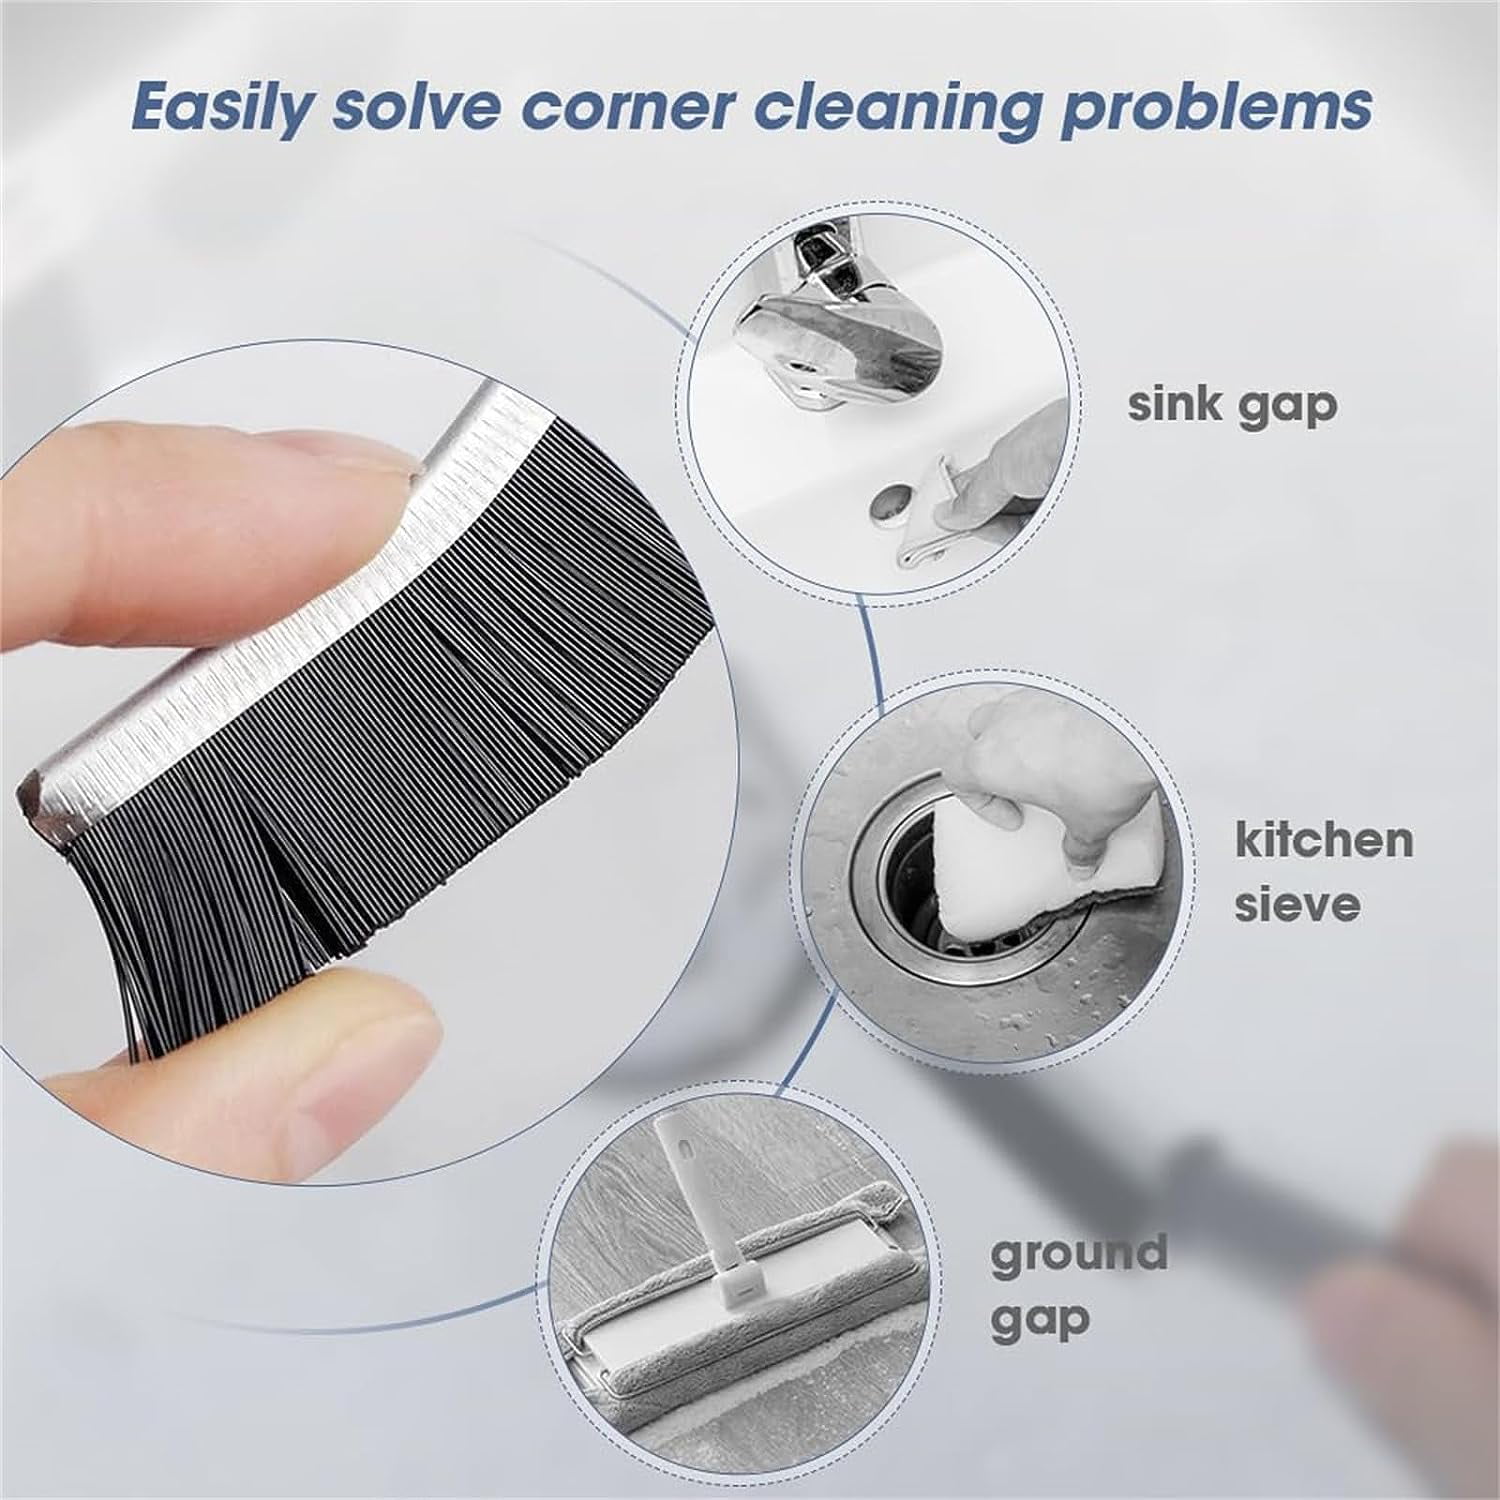 Seinohome Hard-Bristled Crevice Cleaning Brush, Seino Home Cleaner Scrub  Brush, Gap Cleaning Brush, Hand-Held Groove Gap Household Cleaning Brush